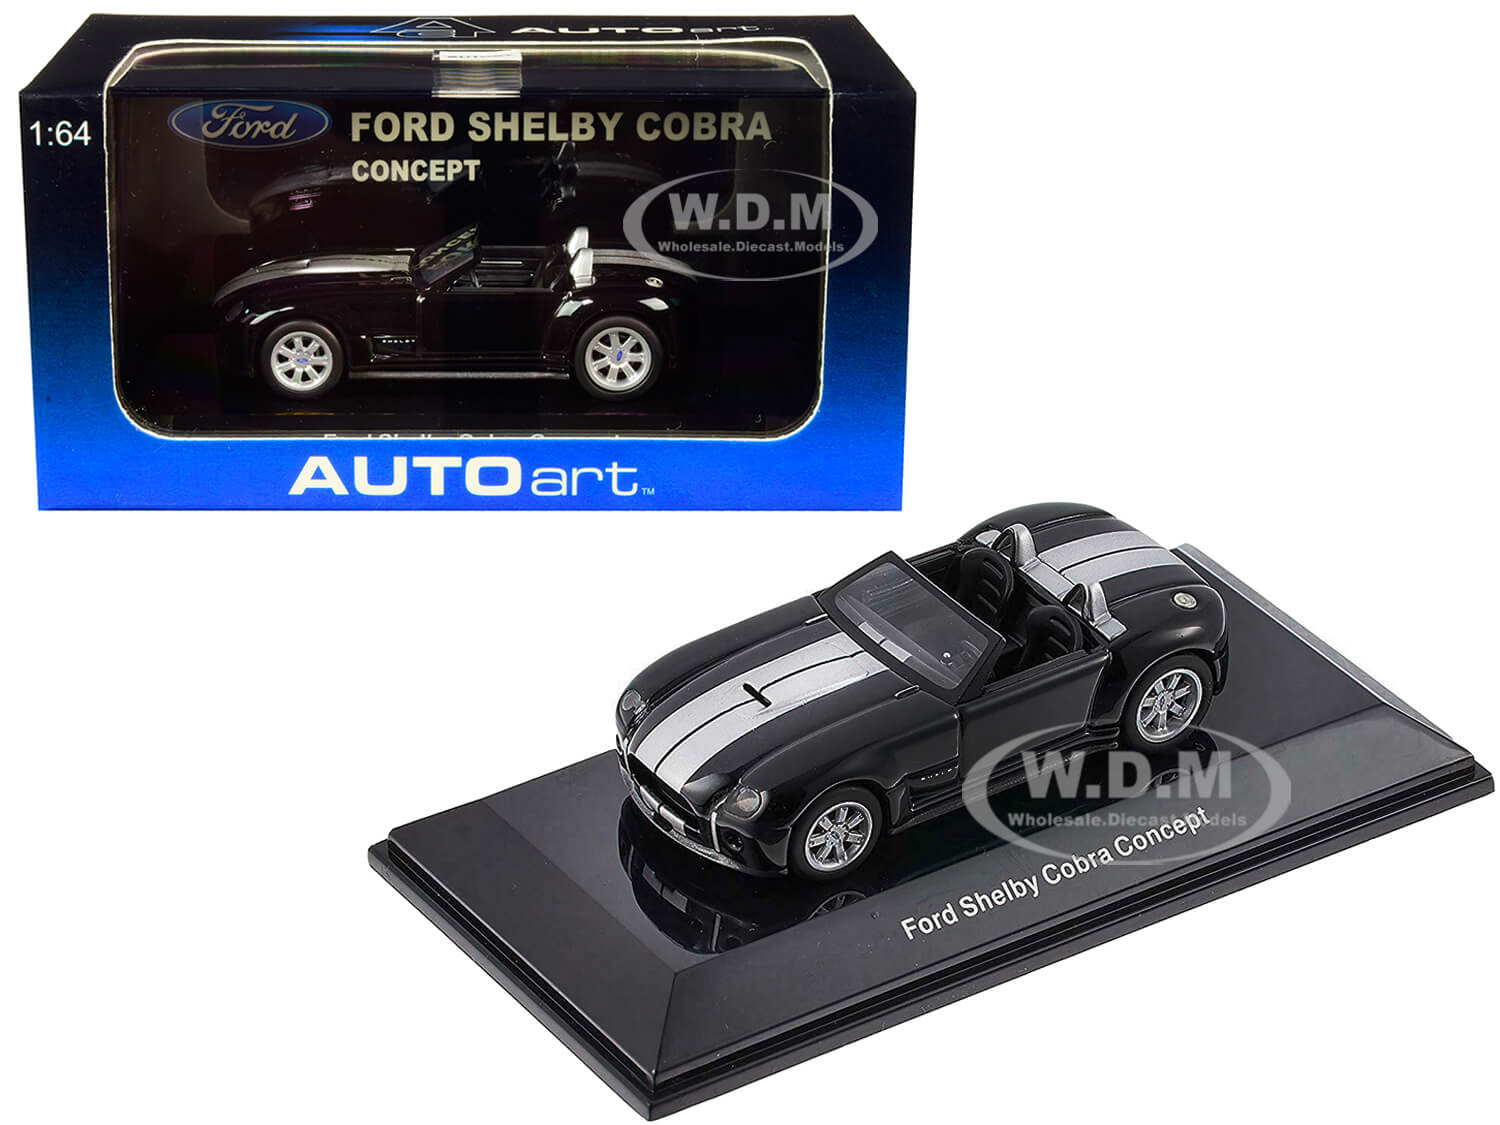 2004 Ford Shelby Cobra Concept Ebony Black Metallic With Bright Argent Silver Stripes 1/64 Diecast Model Car By Autoart